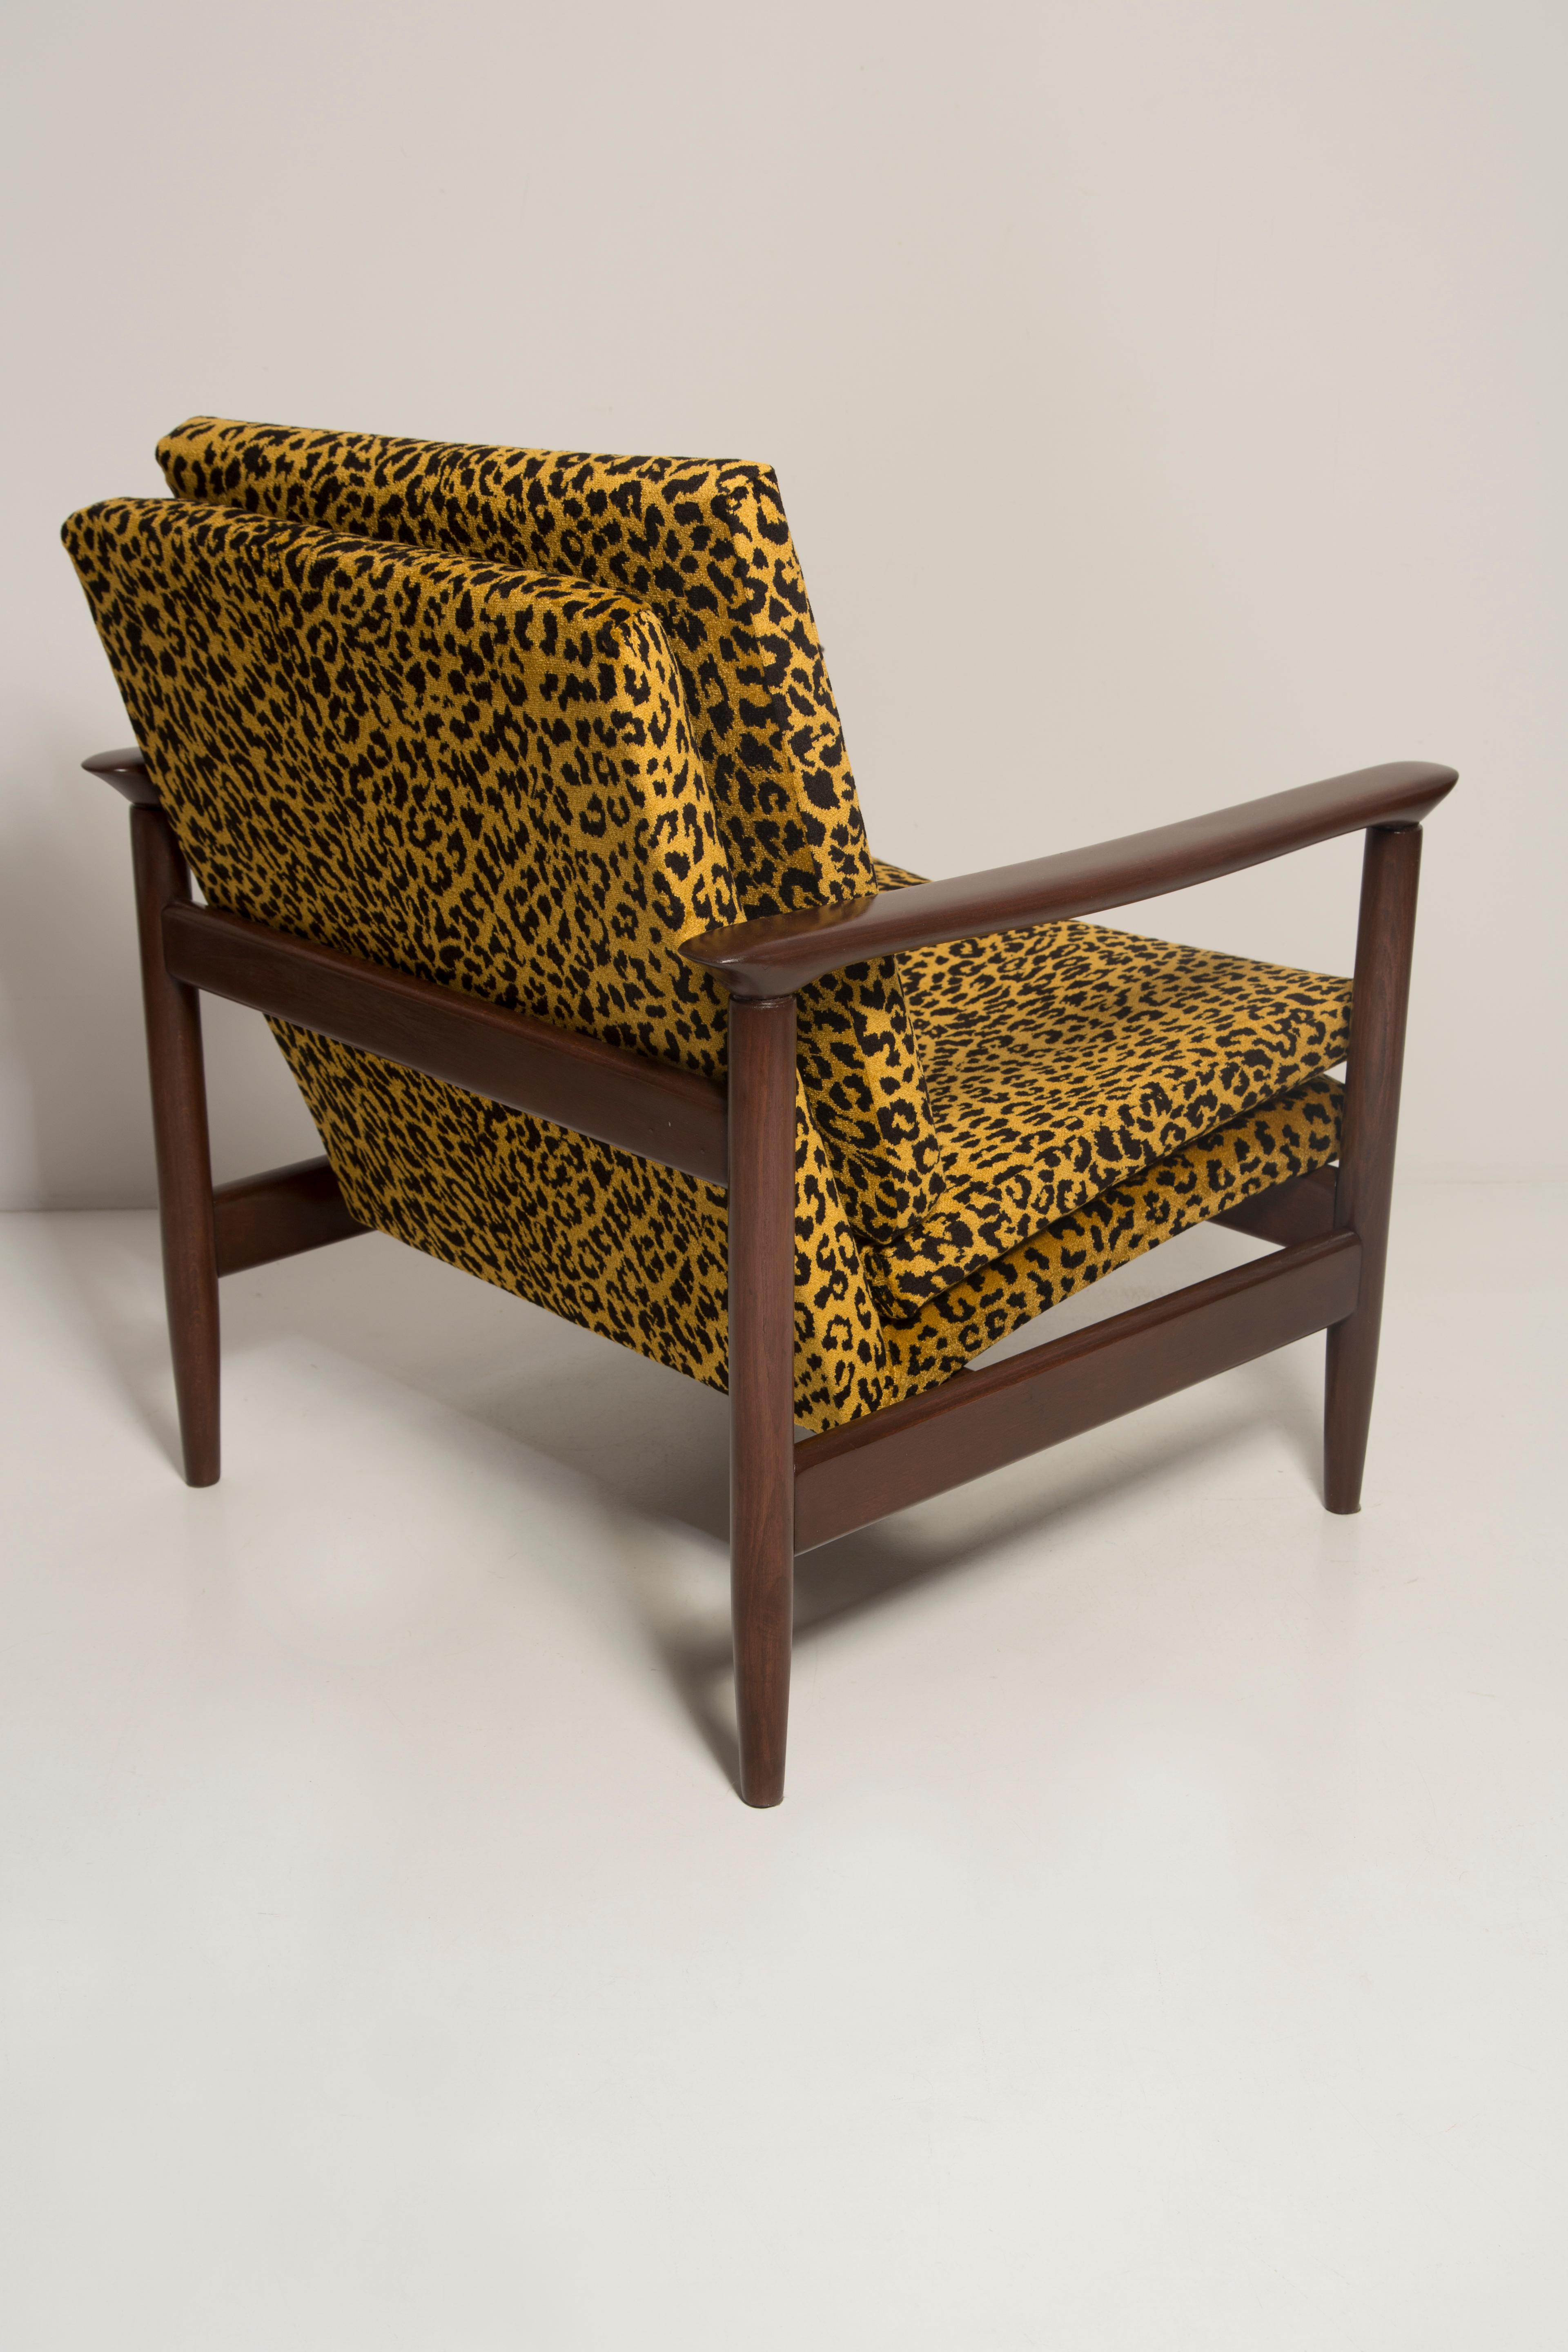 Pair of Midcentury Leopard Armchairs, GFM 142, Edmund Homa, Europe, 1960s For Sale 2